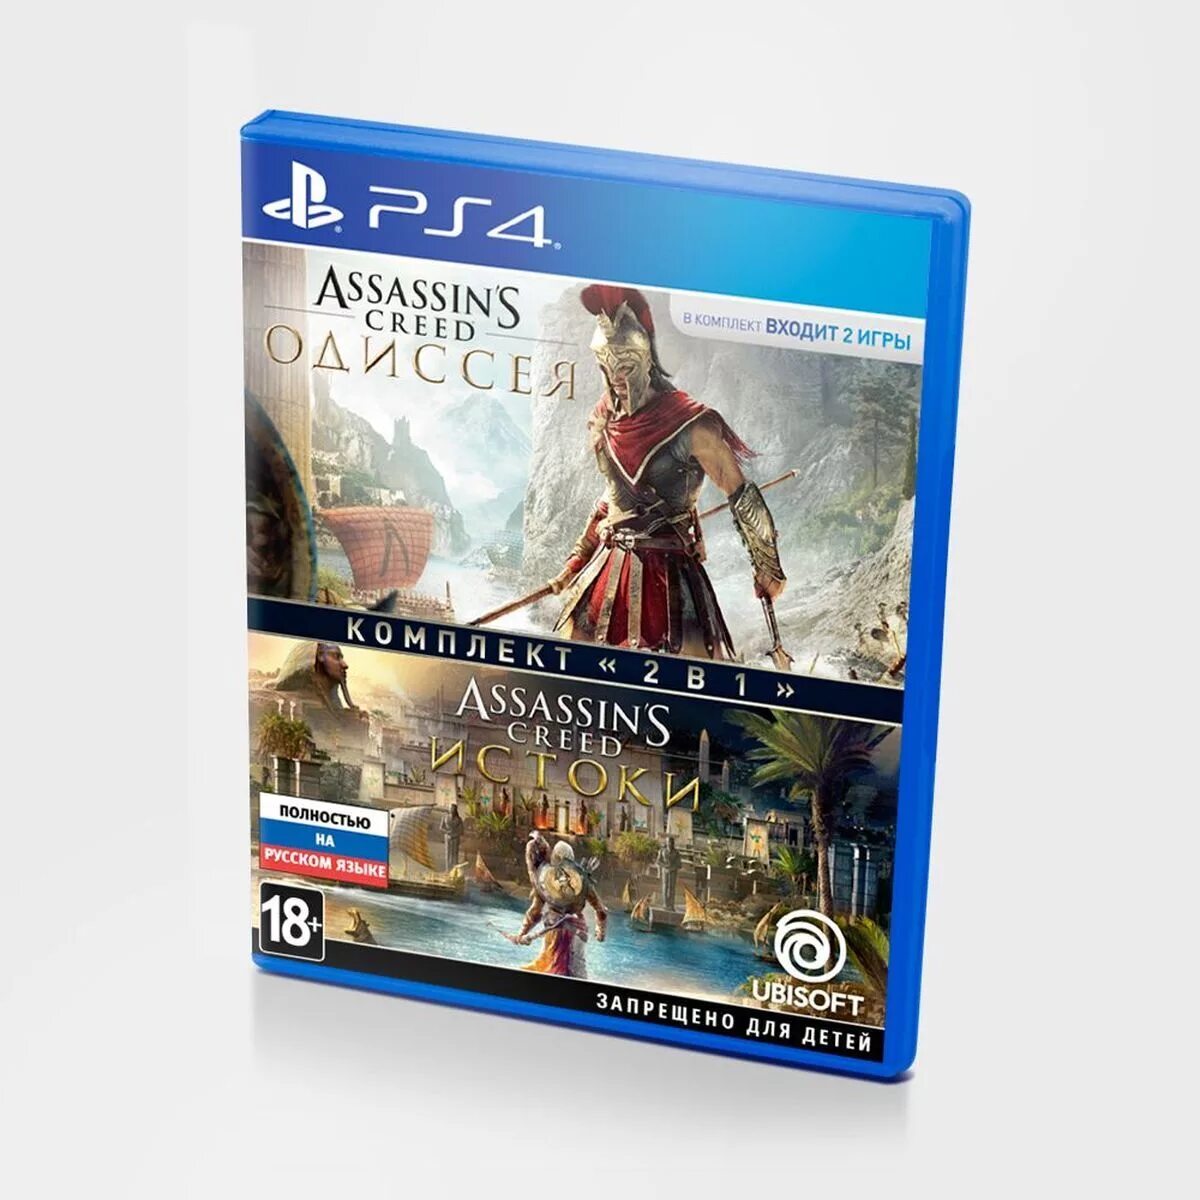 Ps4 диск Assassins Creed. Assassin's Creed Odyssey ps4 диск. Ассасин Истоки диск ps4. Ассасин Истоки Одиссея 2в1 диск. Assassins игра ps4